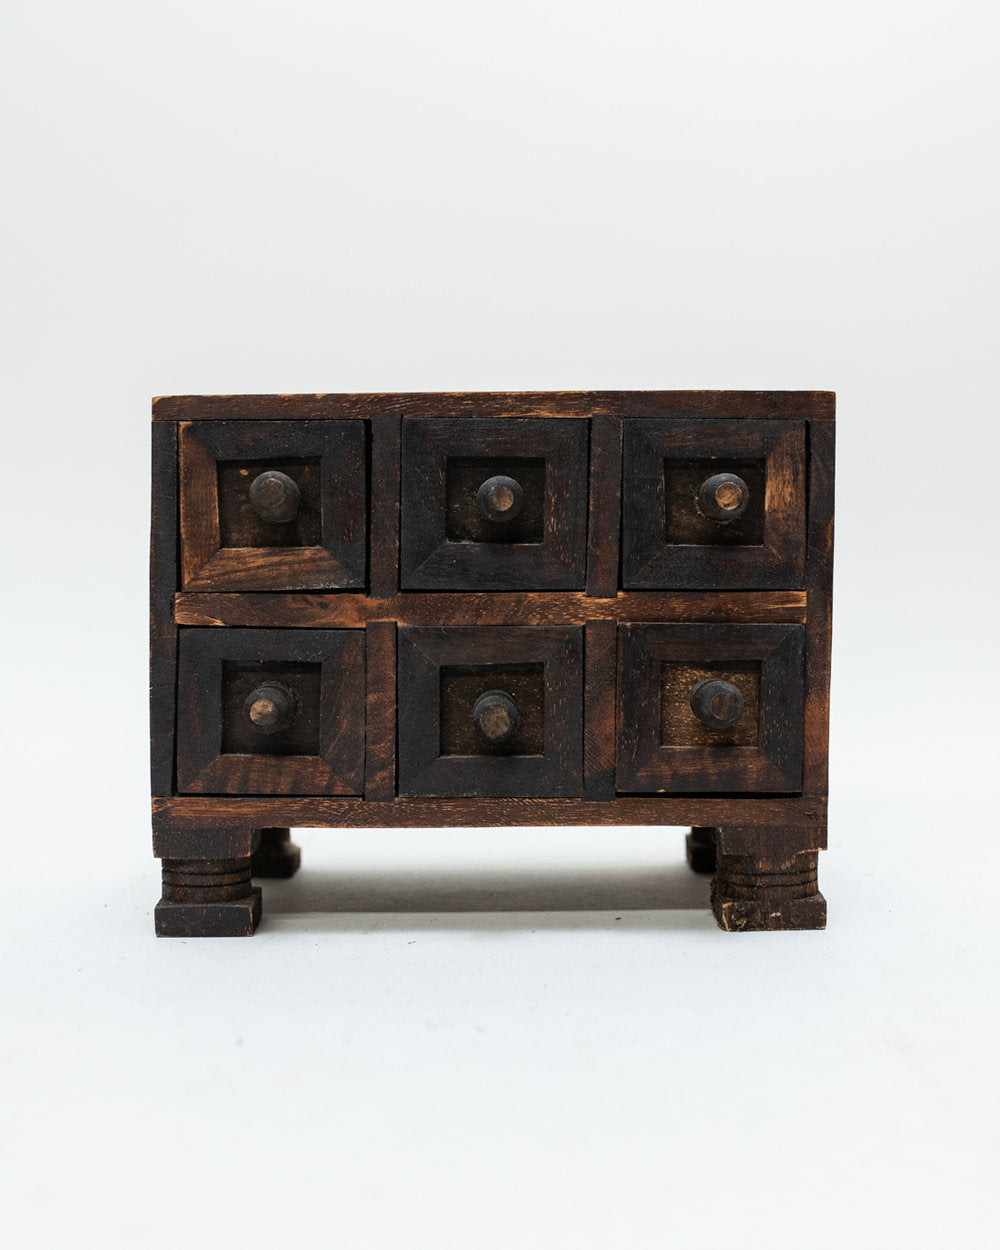 EARLY 1900'S WOODEN JEWELRY BOX